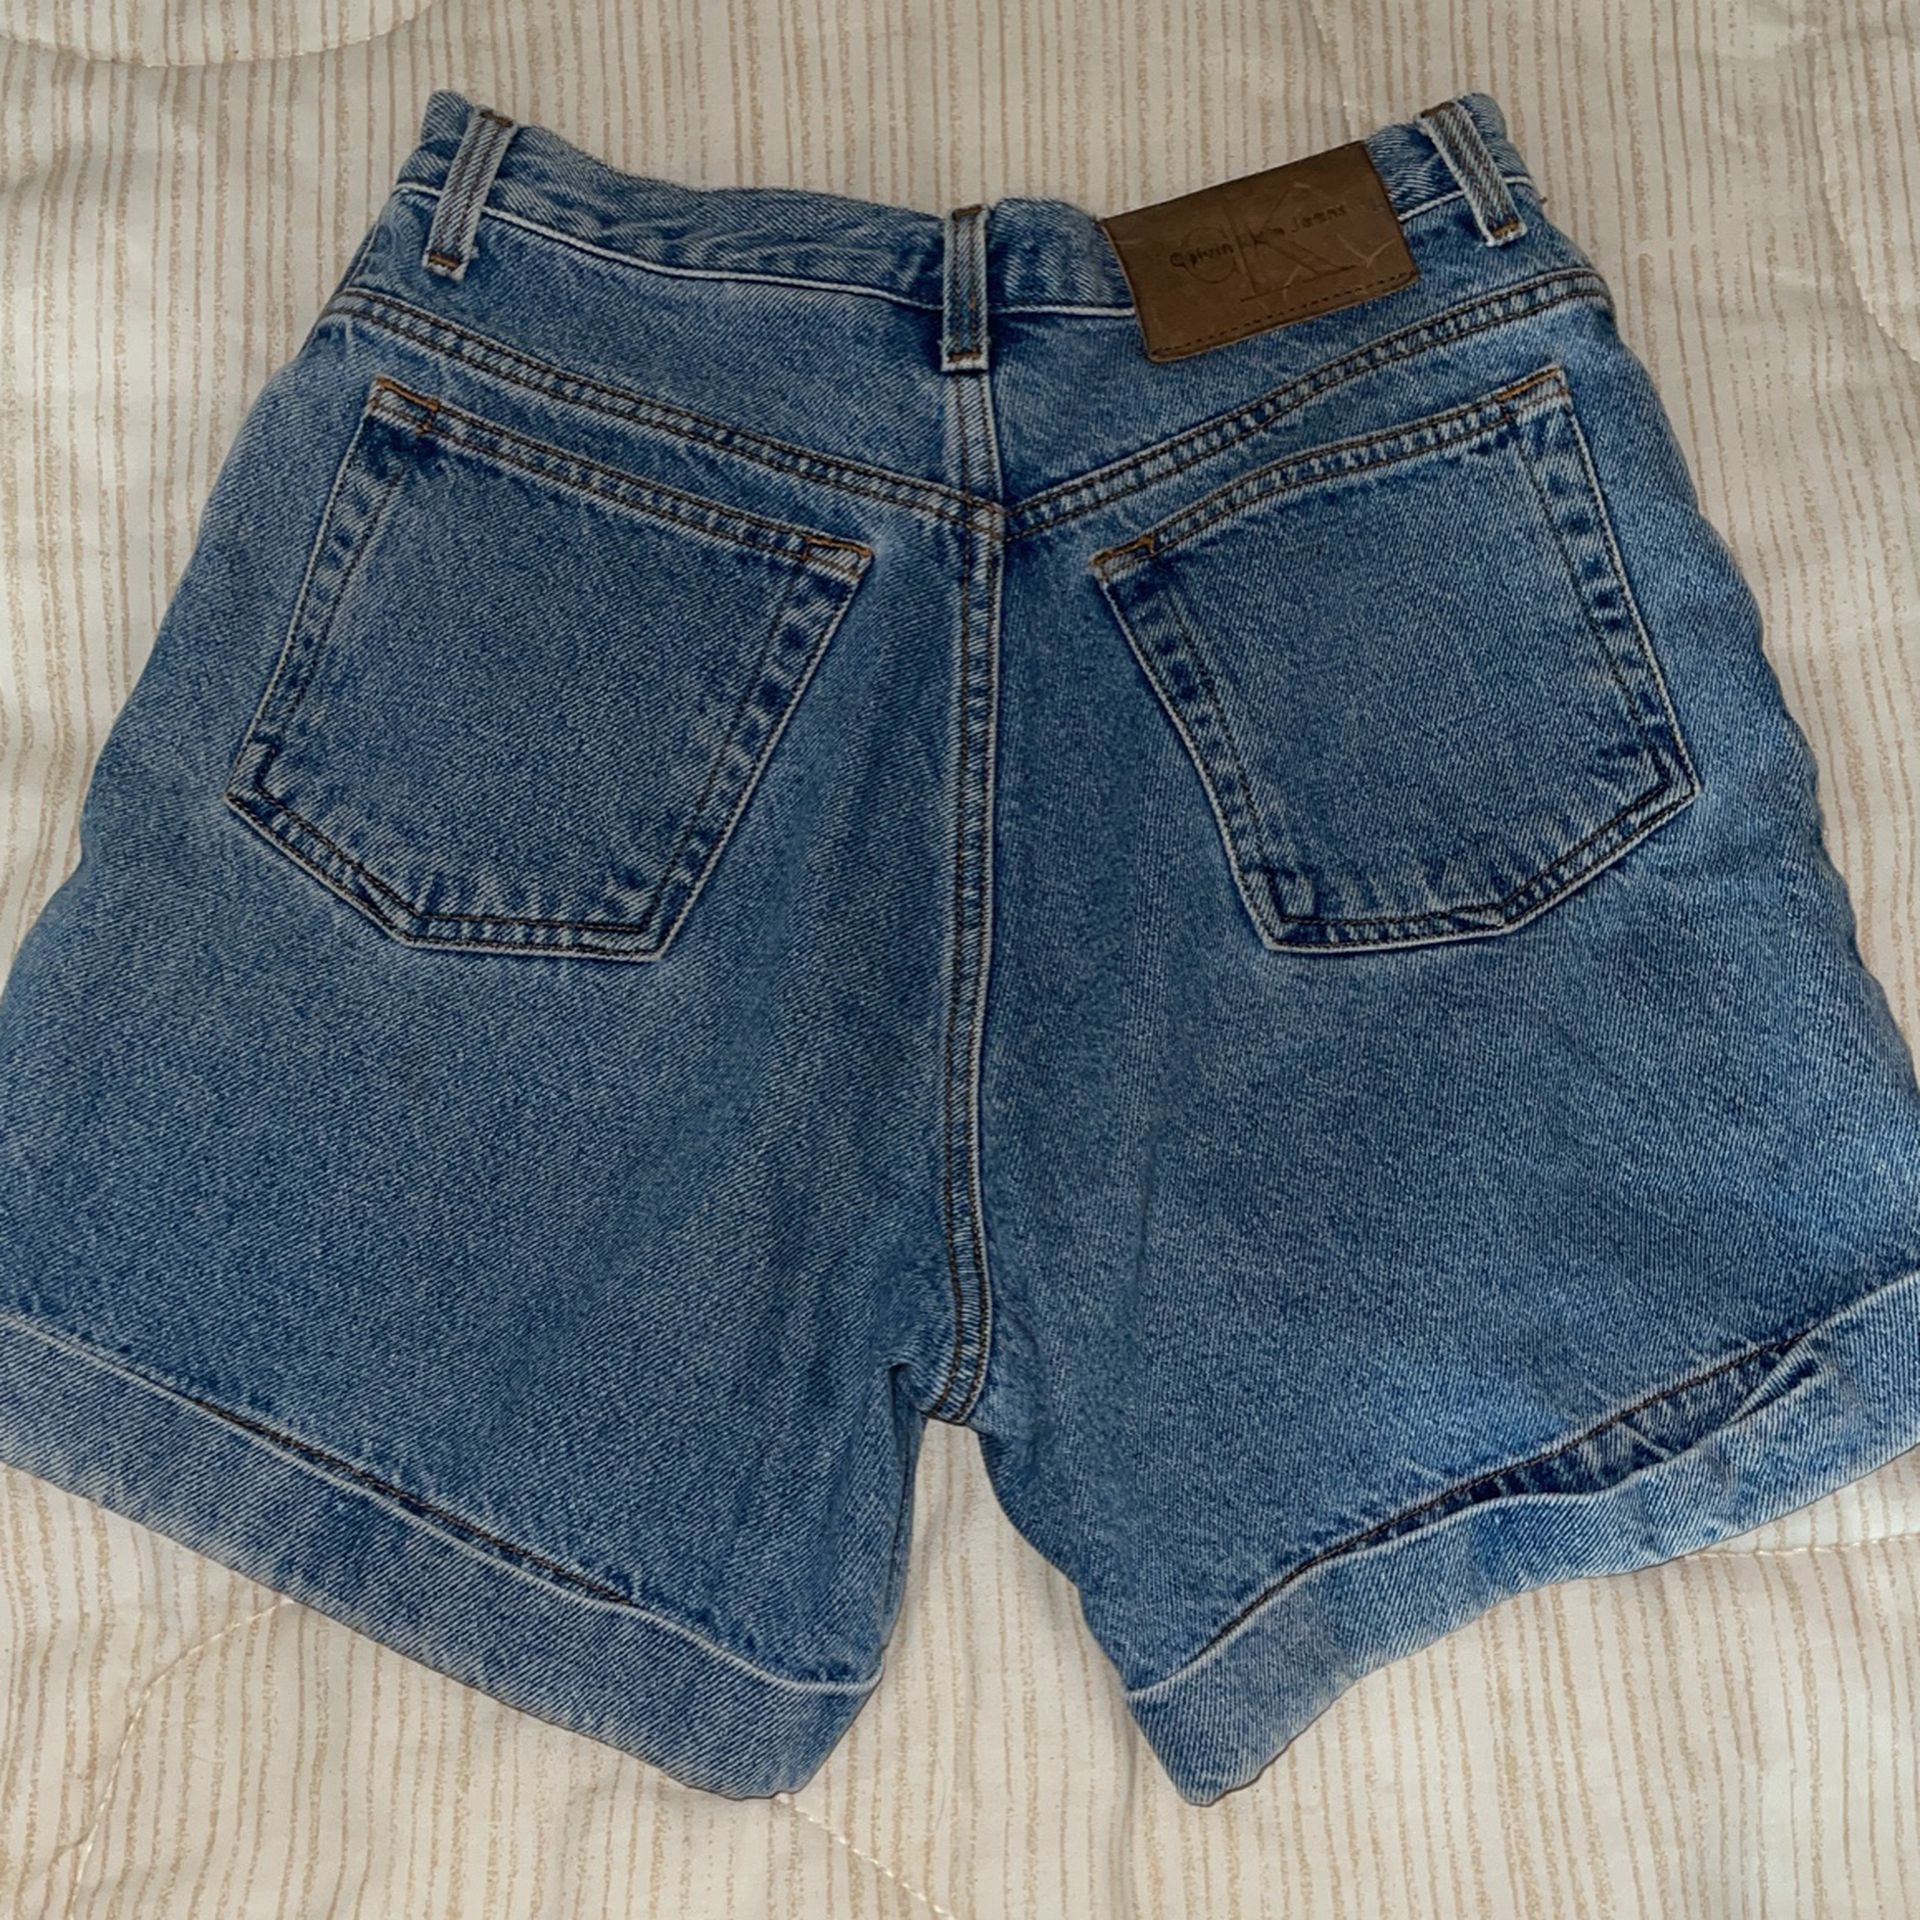 Vintage Calvin Klein Shorts for Sale in Corona, CA - OfferUp